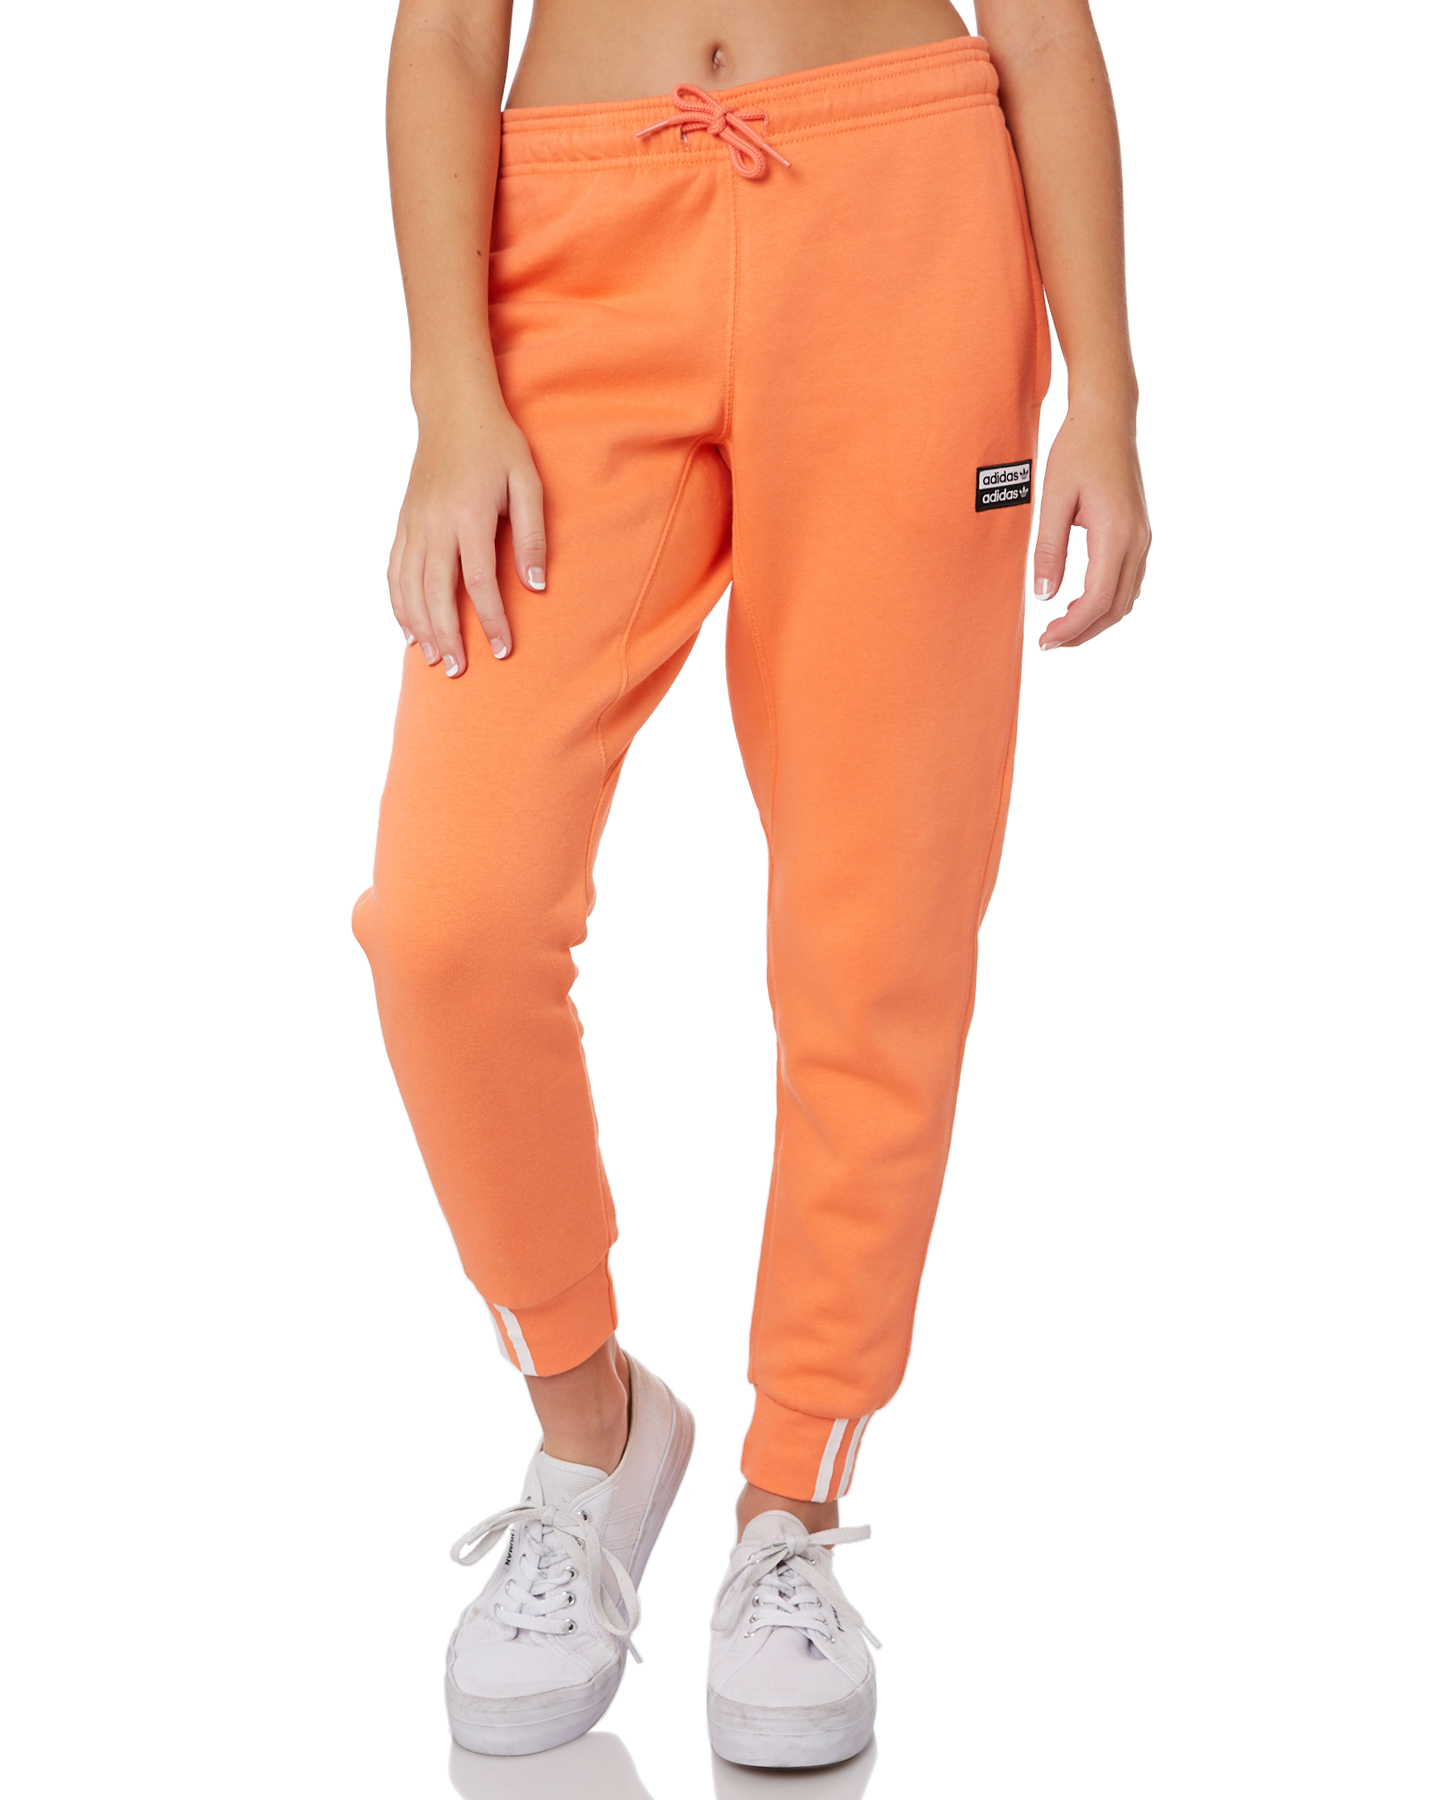 Adidas Youth Girls V Ocal Track Pant - Semi Coral | SurfStitch